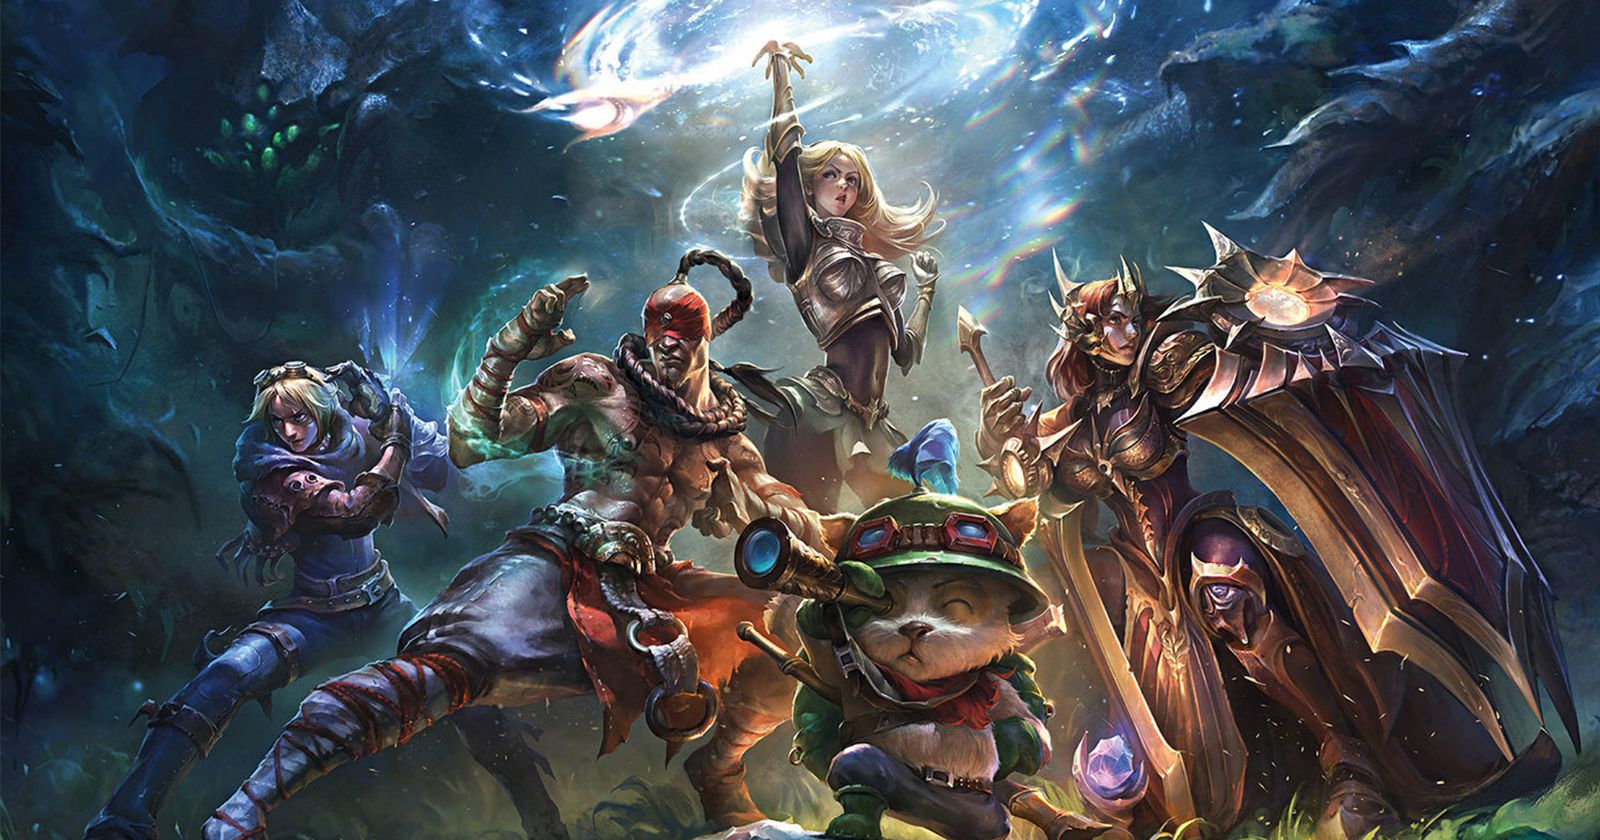 LOL: How to link League of Legends to Facebook